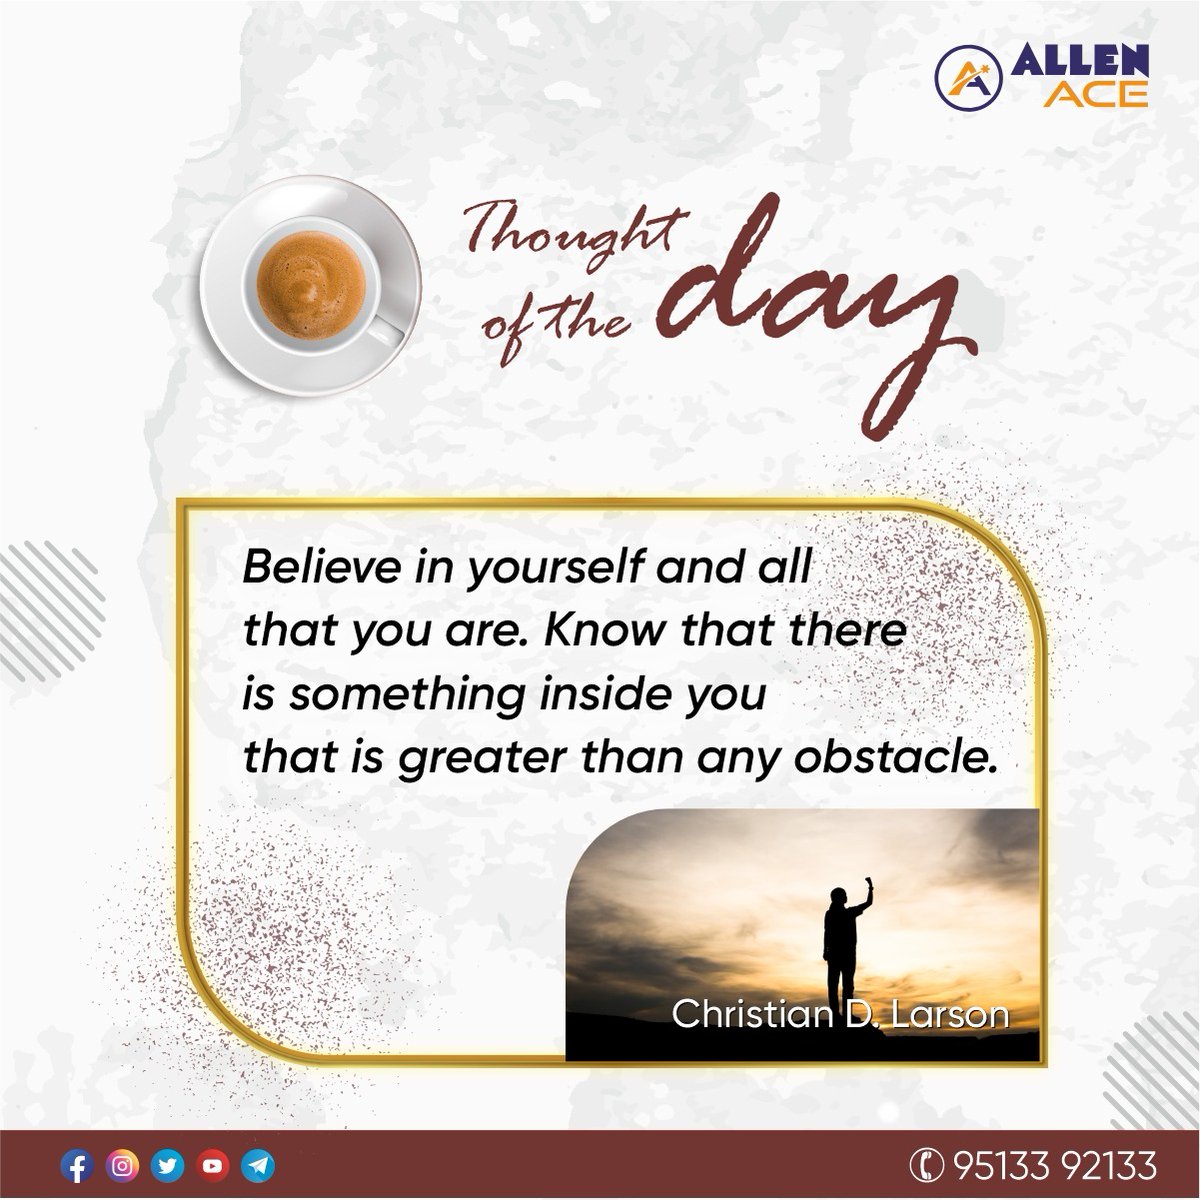 ➡️ Embrace your inner strength and believe in yourself.

#motivationdaily #motivationquotes #EmpowerYourMind #BelieveInYourself #SelfConfidence #PositiveMindset #EmpowerYourself #SelfLove #SelfMotivation #upscmotivation